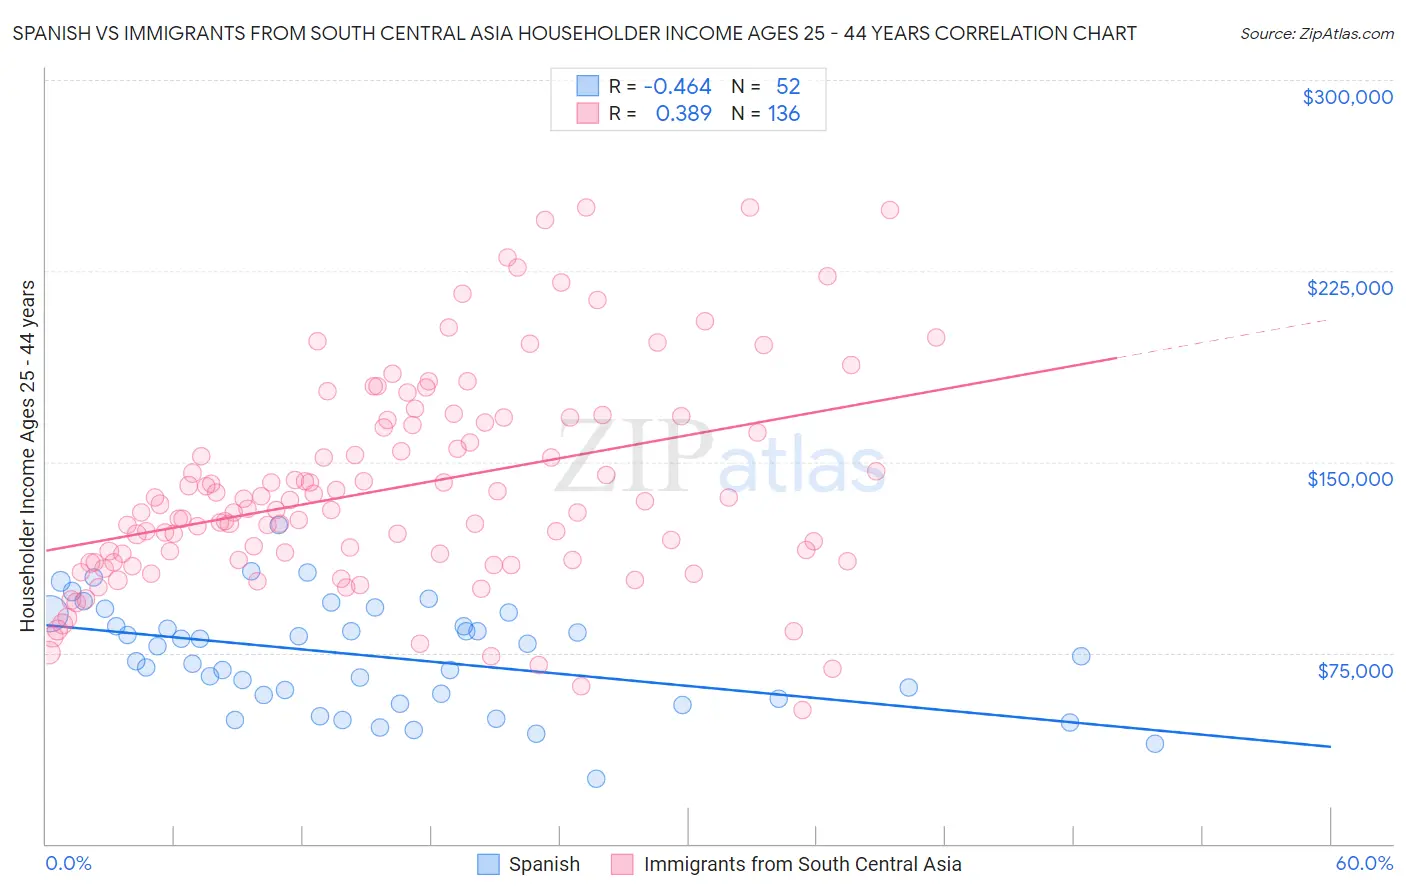 Spanish vs Immigrants from South Central Asia Householder Income Ages 25 - 44 years